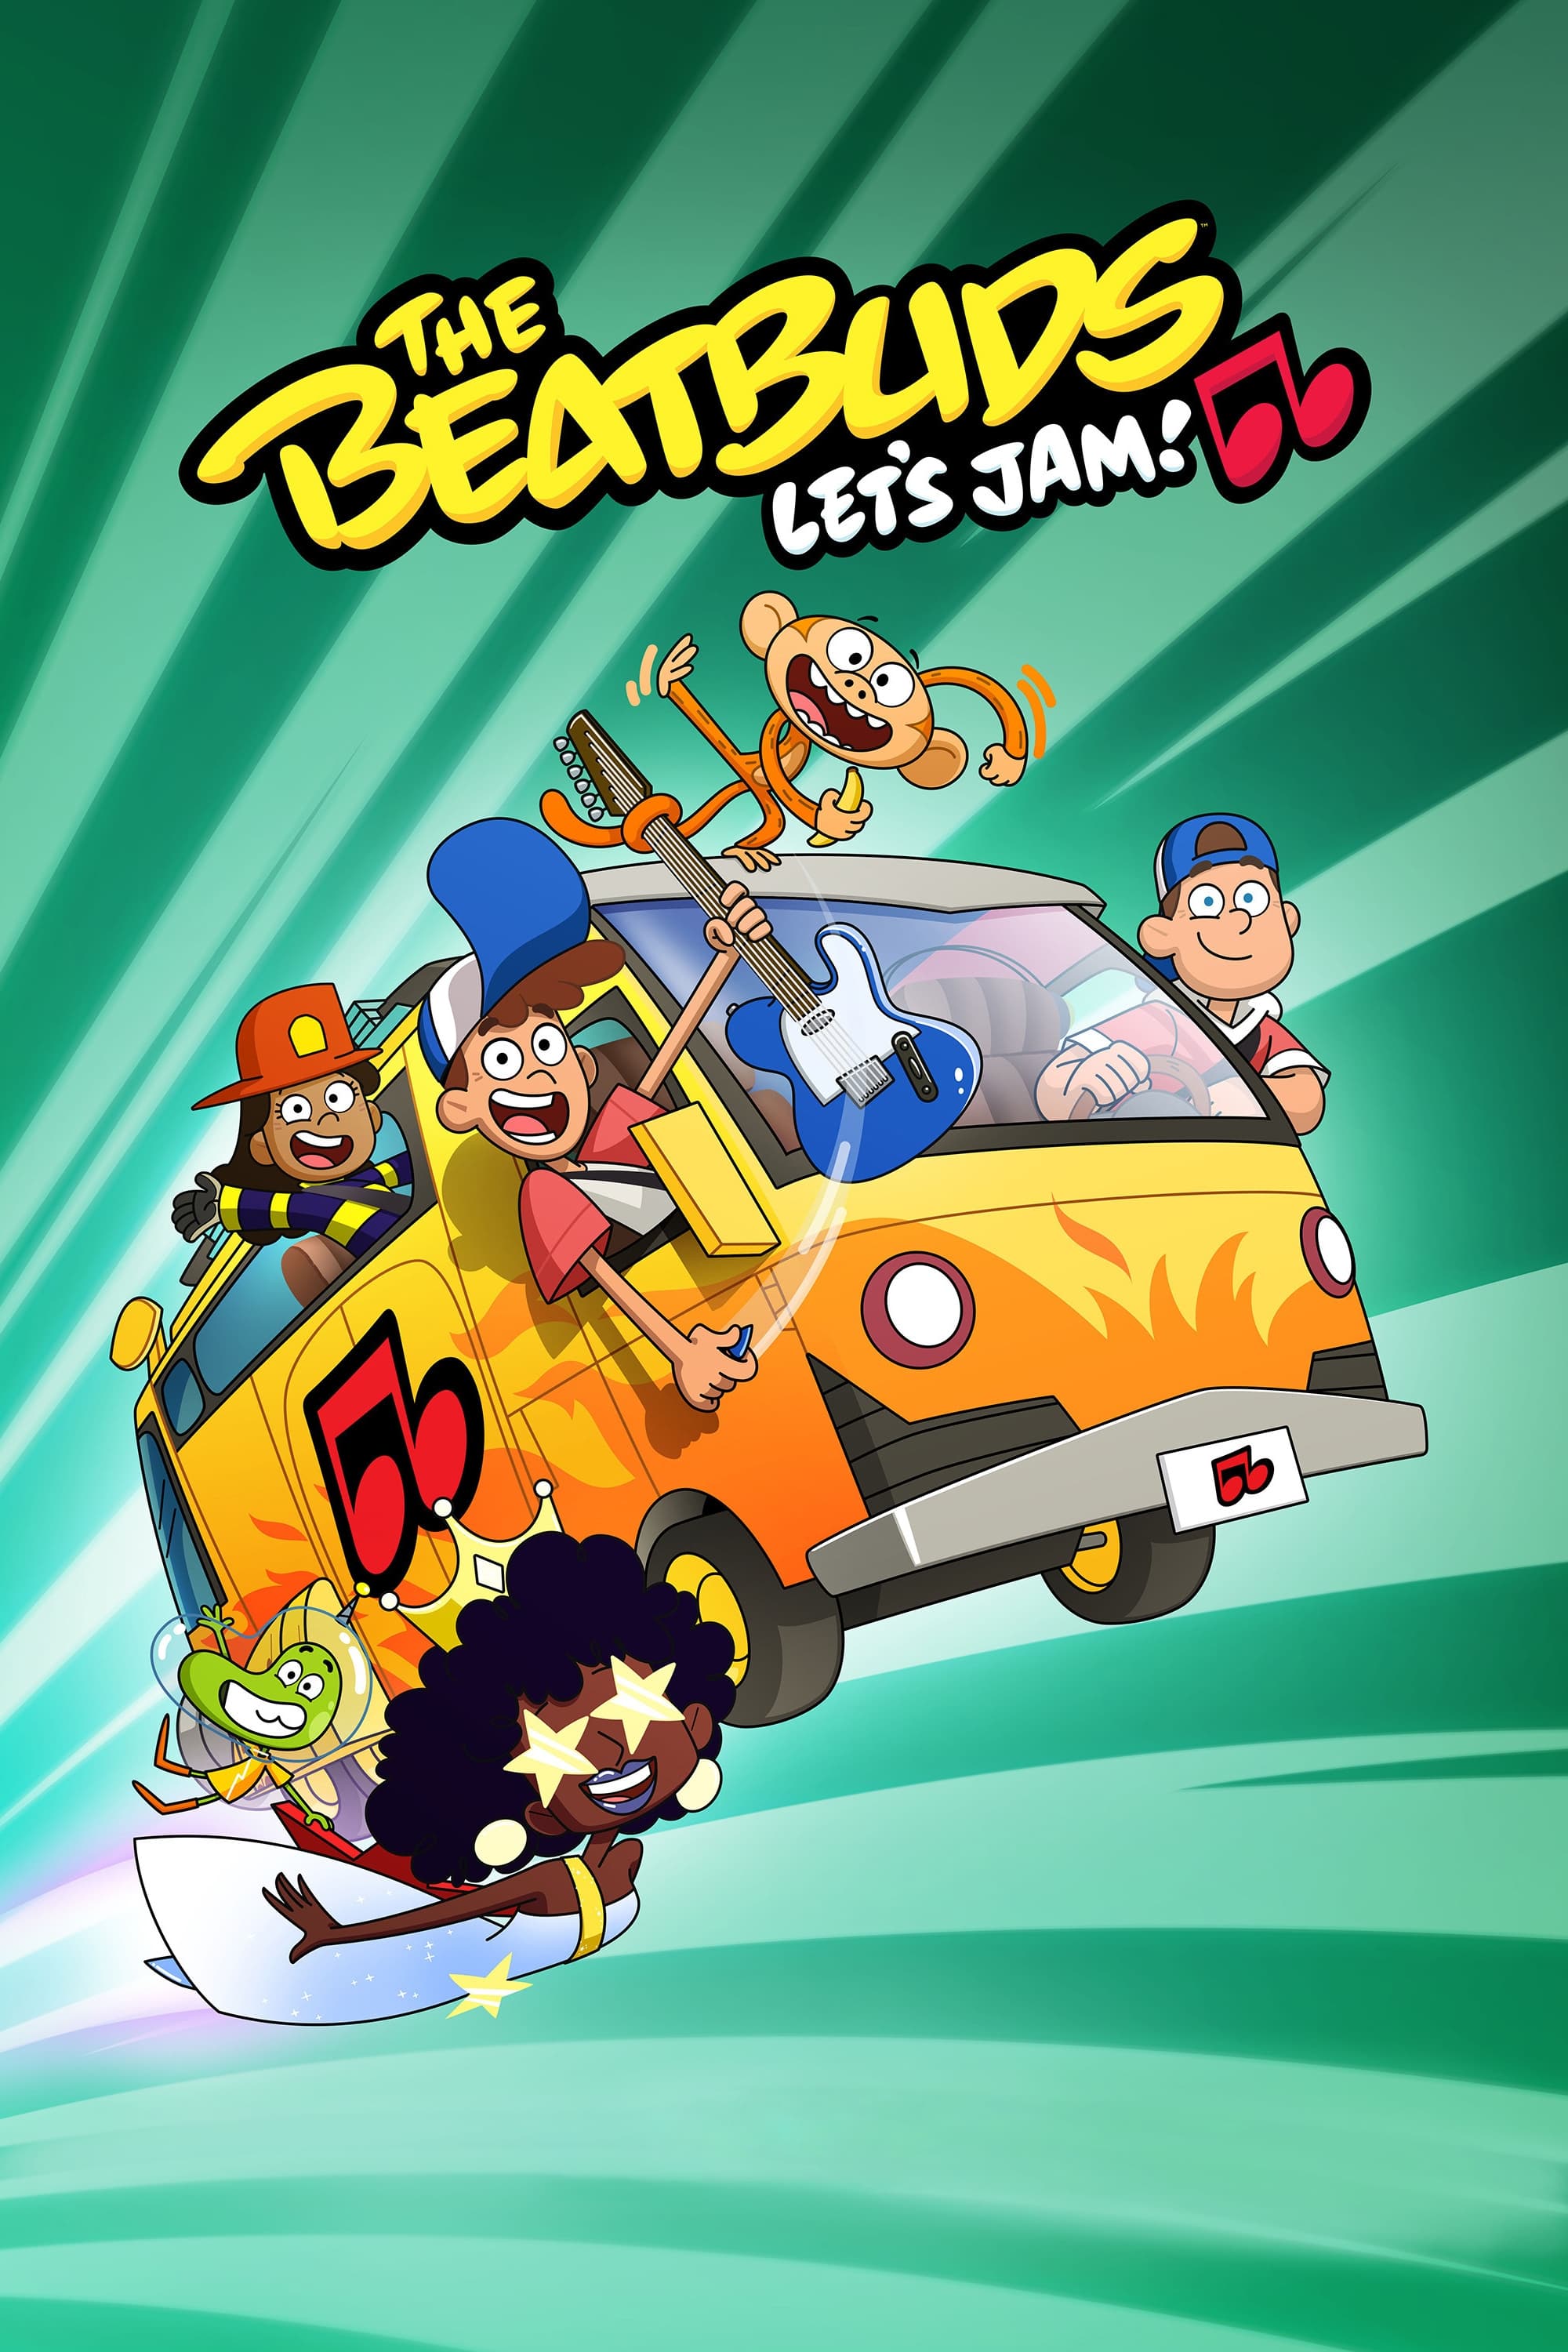 The Beatbuds, Let's Jam!